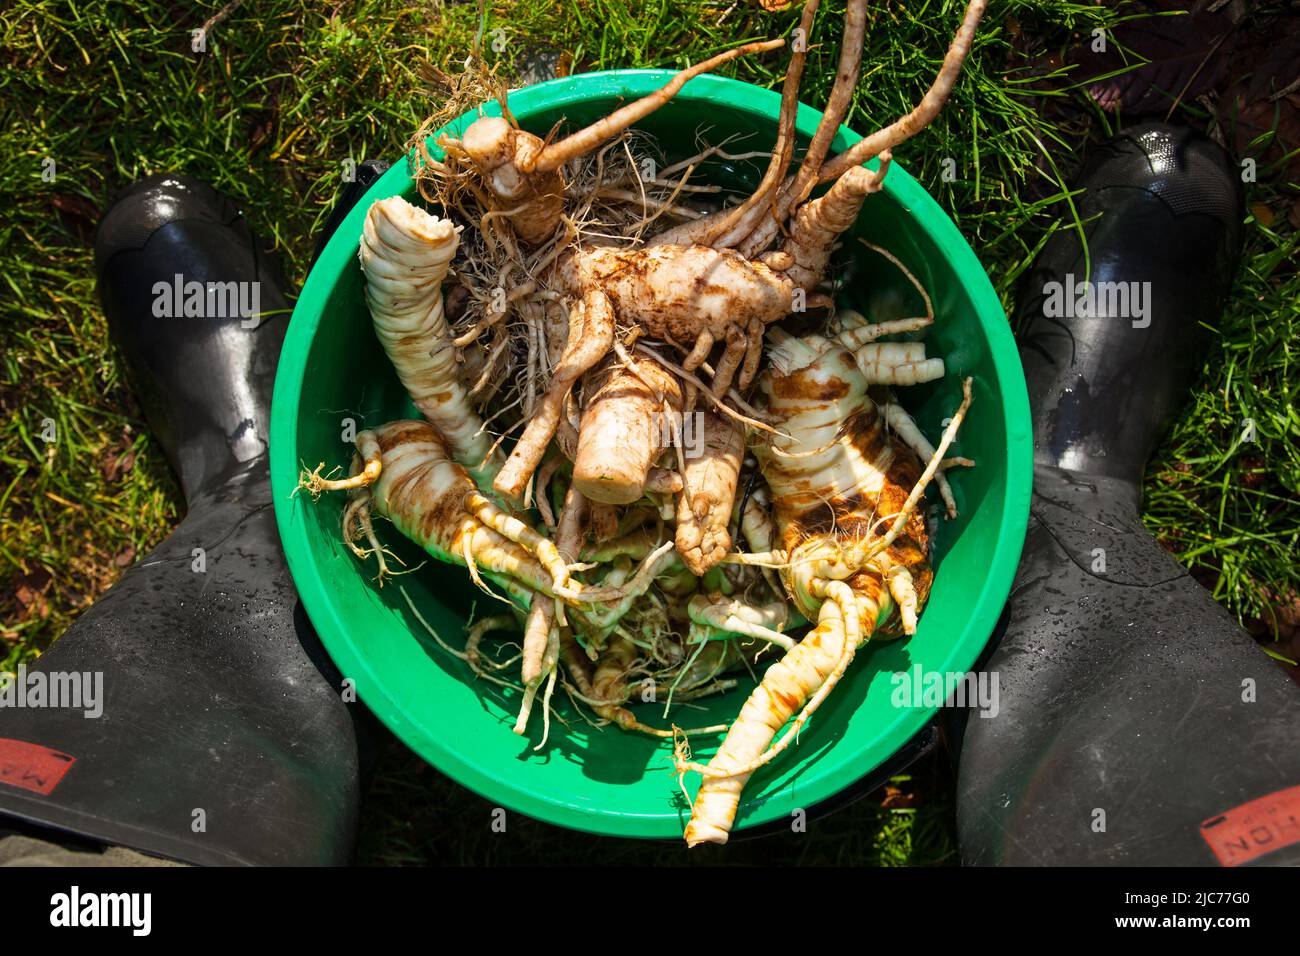 Life in New Zealand. Fishing, foraging, diving, gardening and sports. Freshly-foraged wild Parsnips and Bull Thistle Root. Eat the weeds. Stock Photo